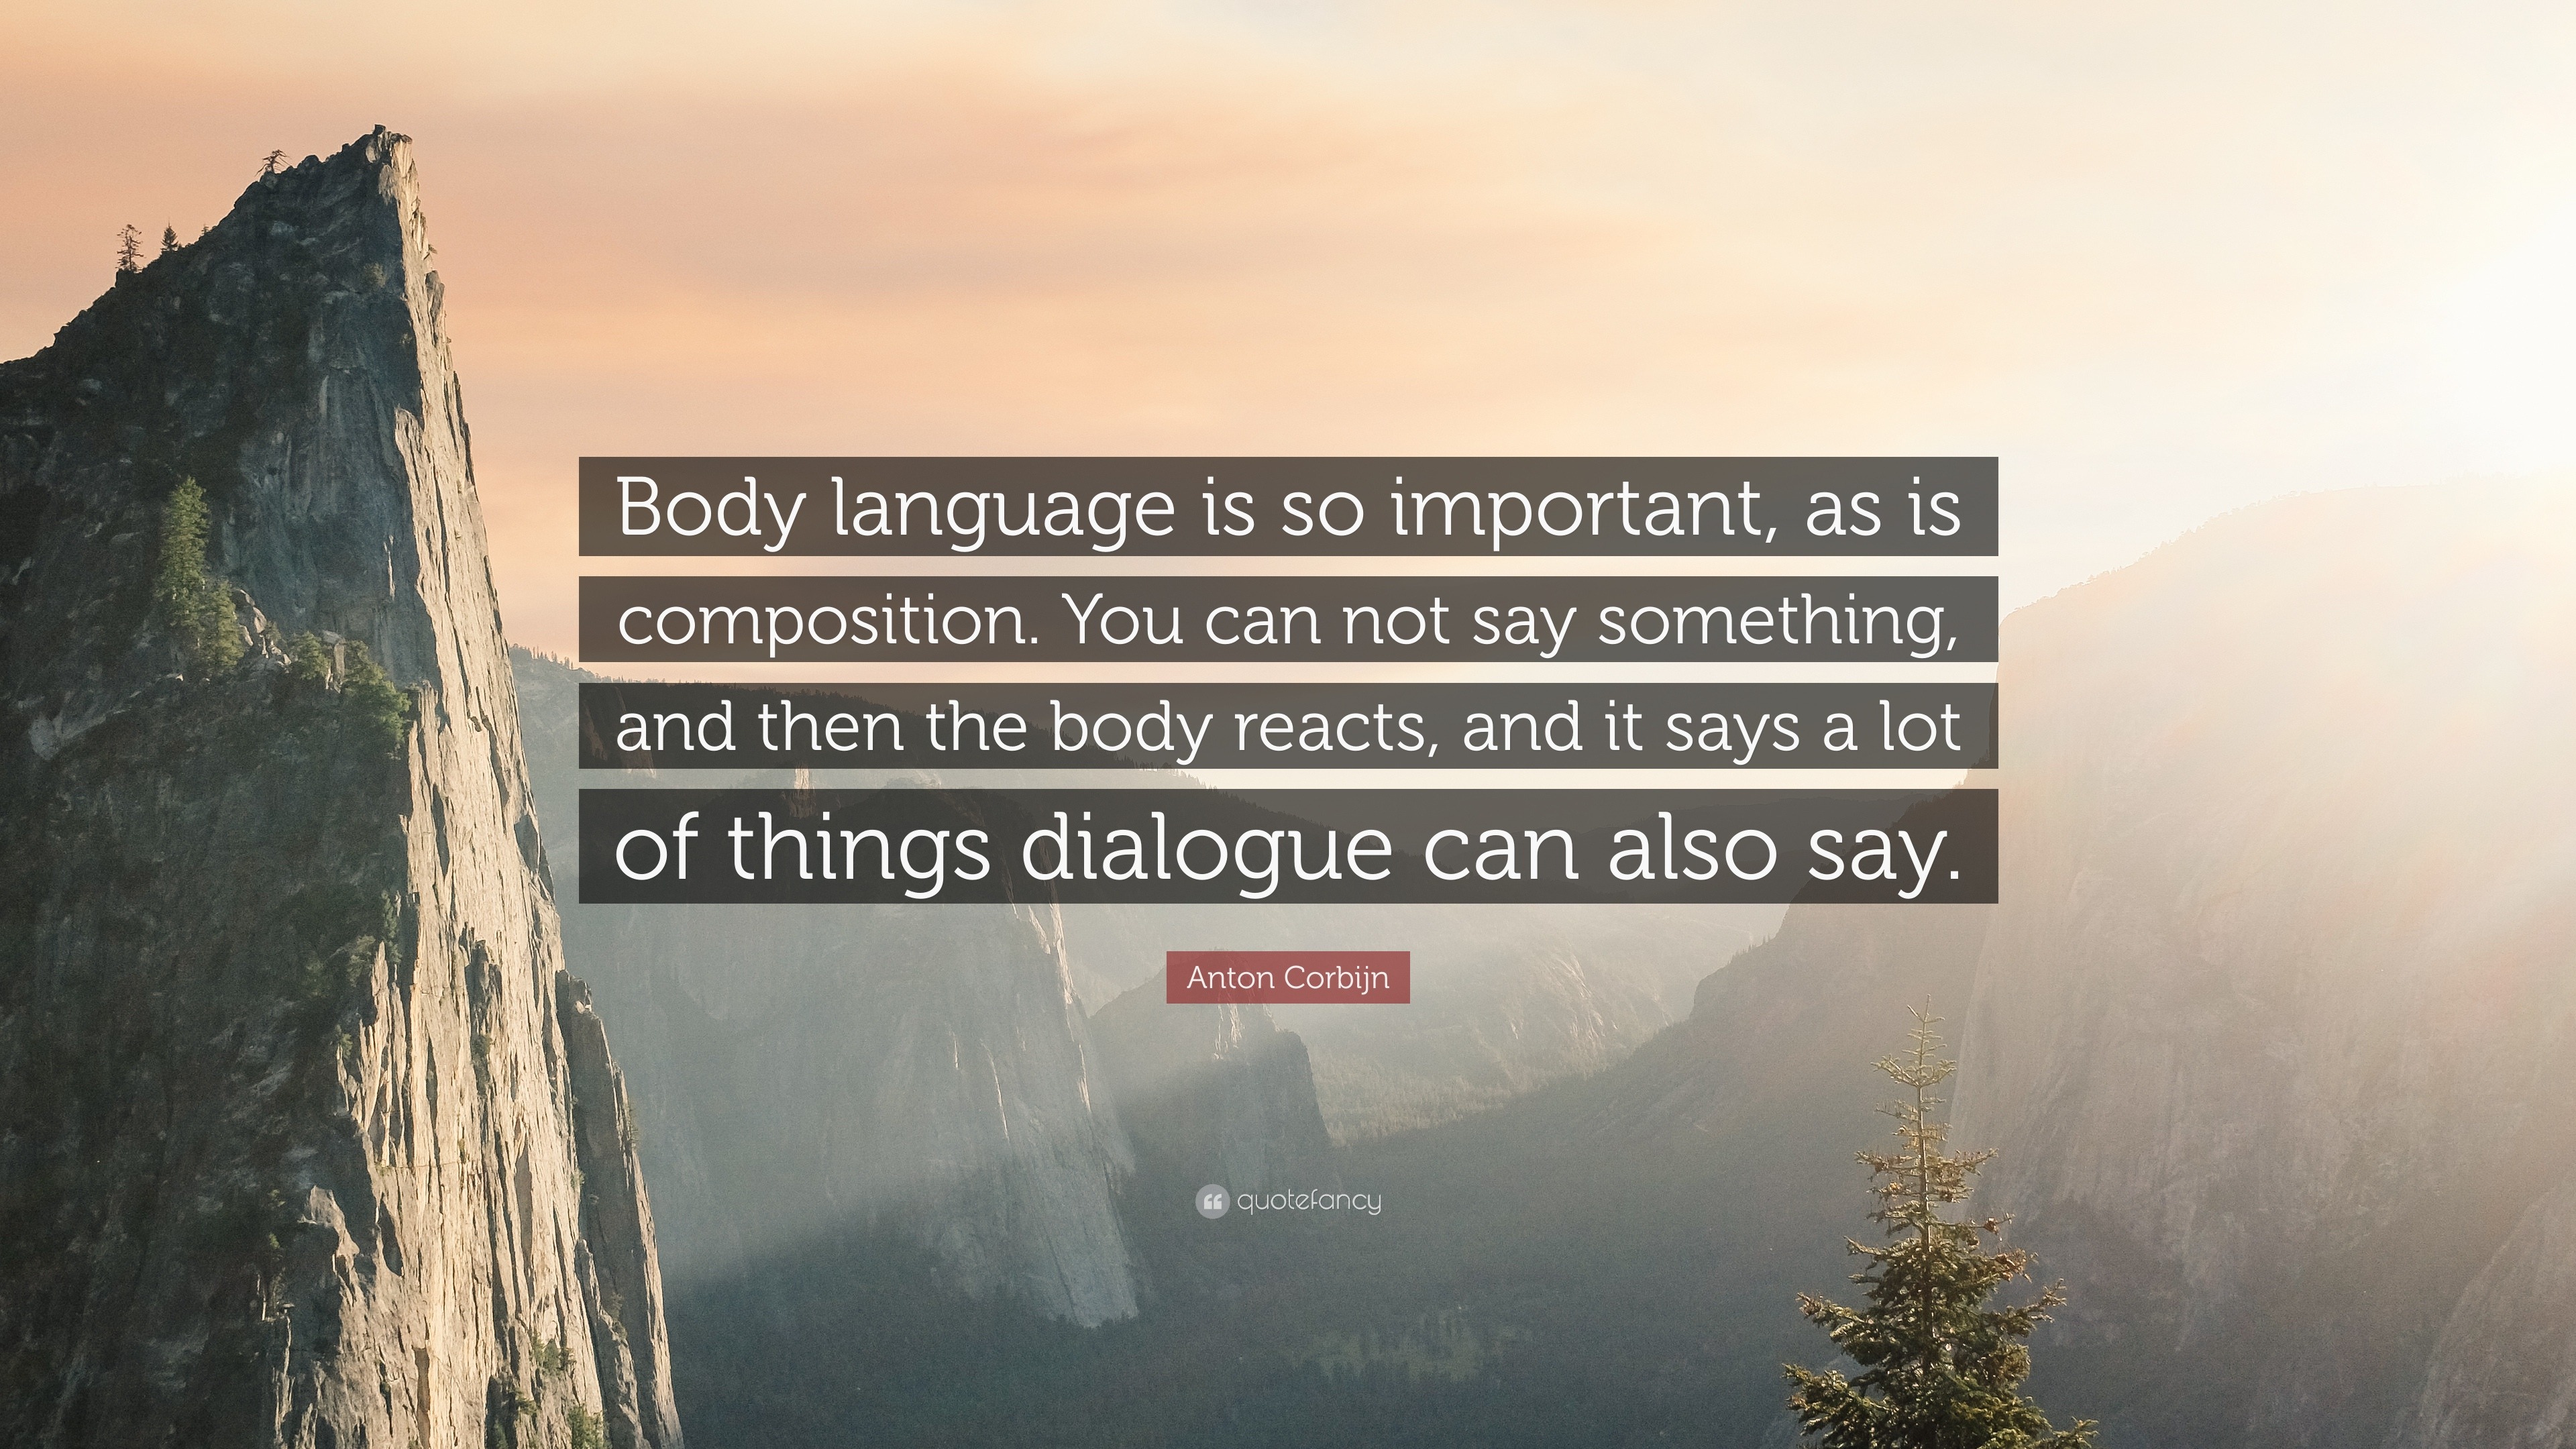 Anton Corbijn Quote: "Body language is so important, as is composition. You can not say ...